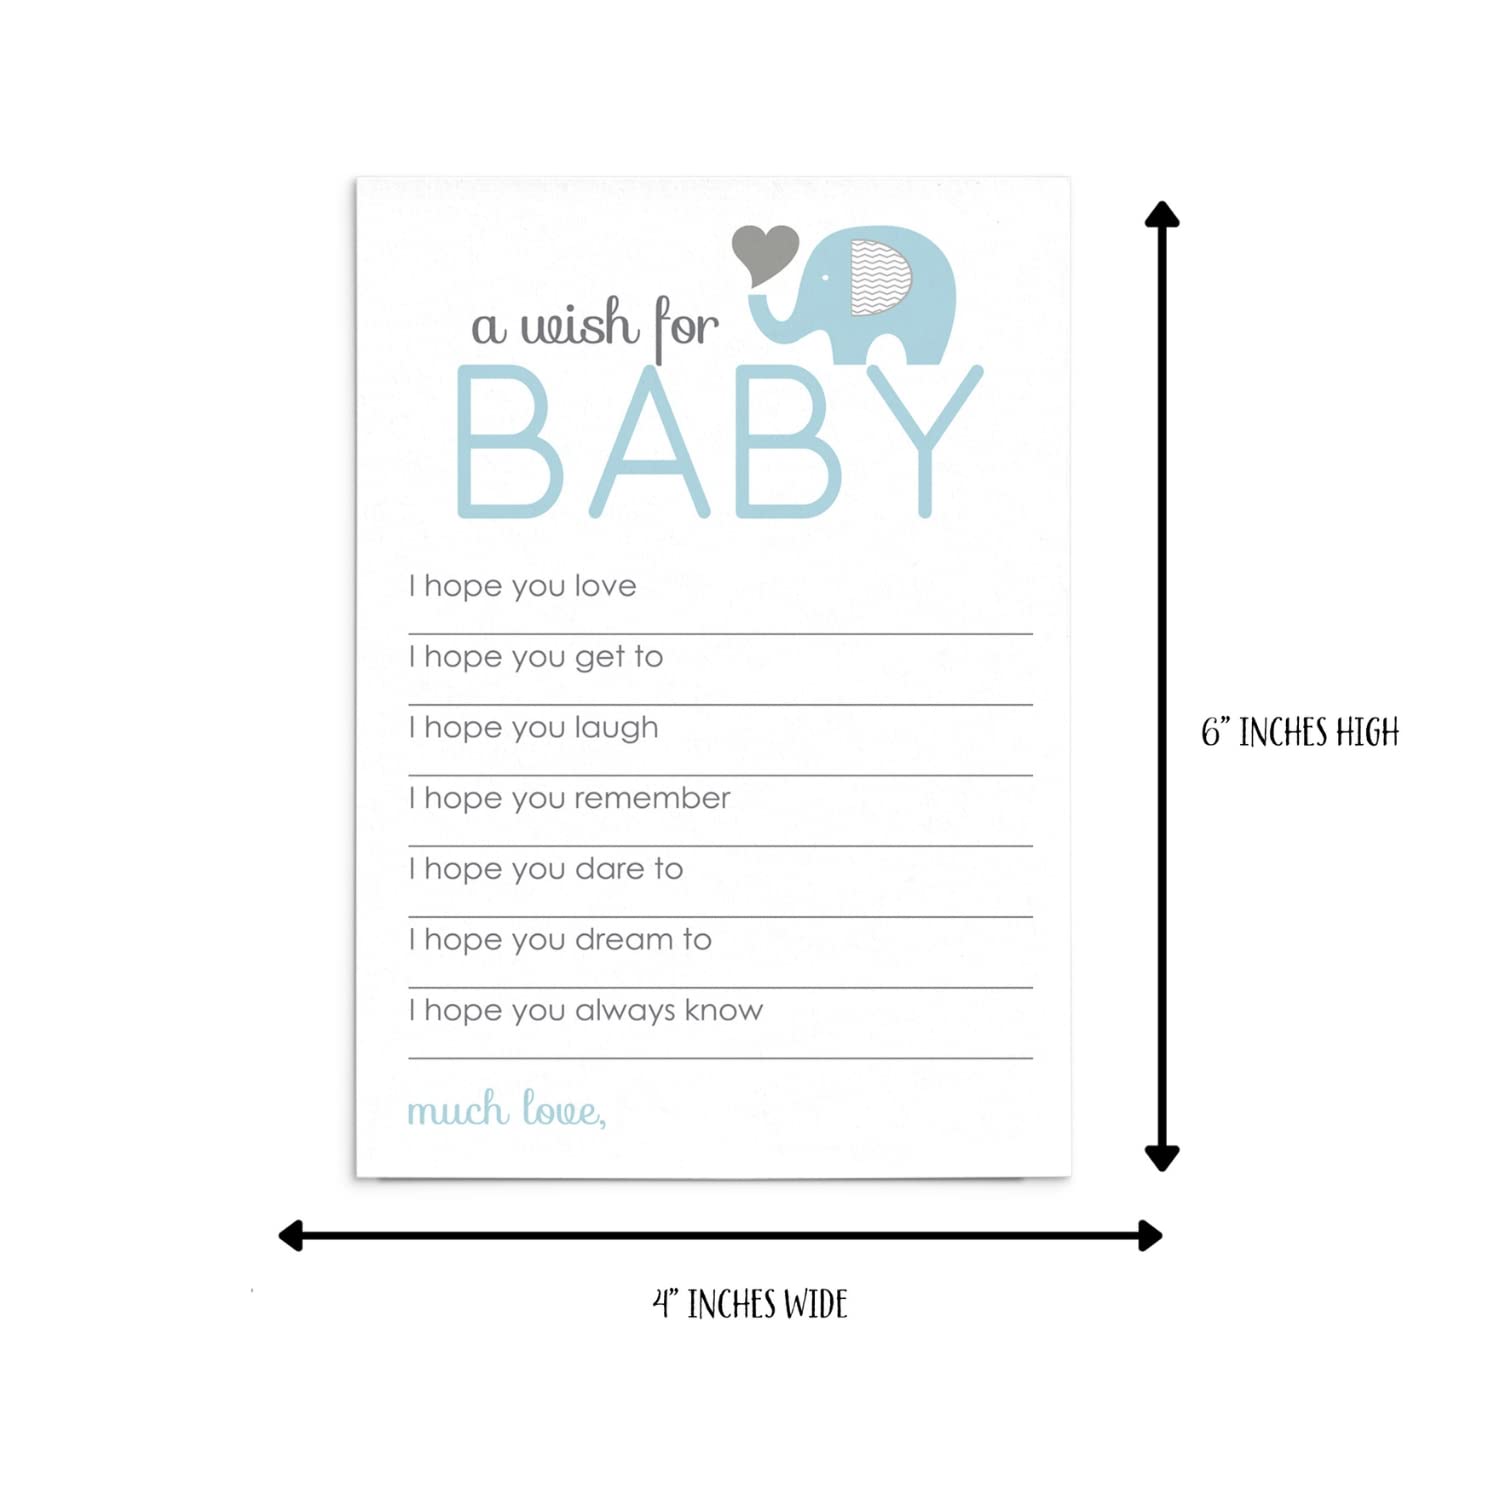 Blue Elephant Wishes for Boys Baby Shower Advice Cand Wish Cards - Parents Keepsake Activity Wishing Well Birthday Memory Ideas Pack of 20 4x6 Set